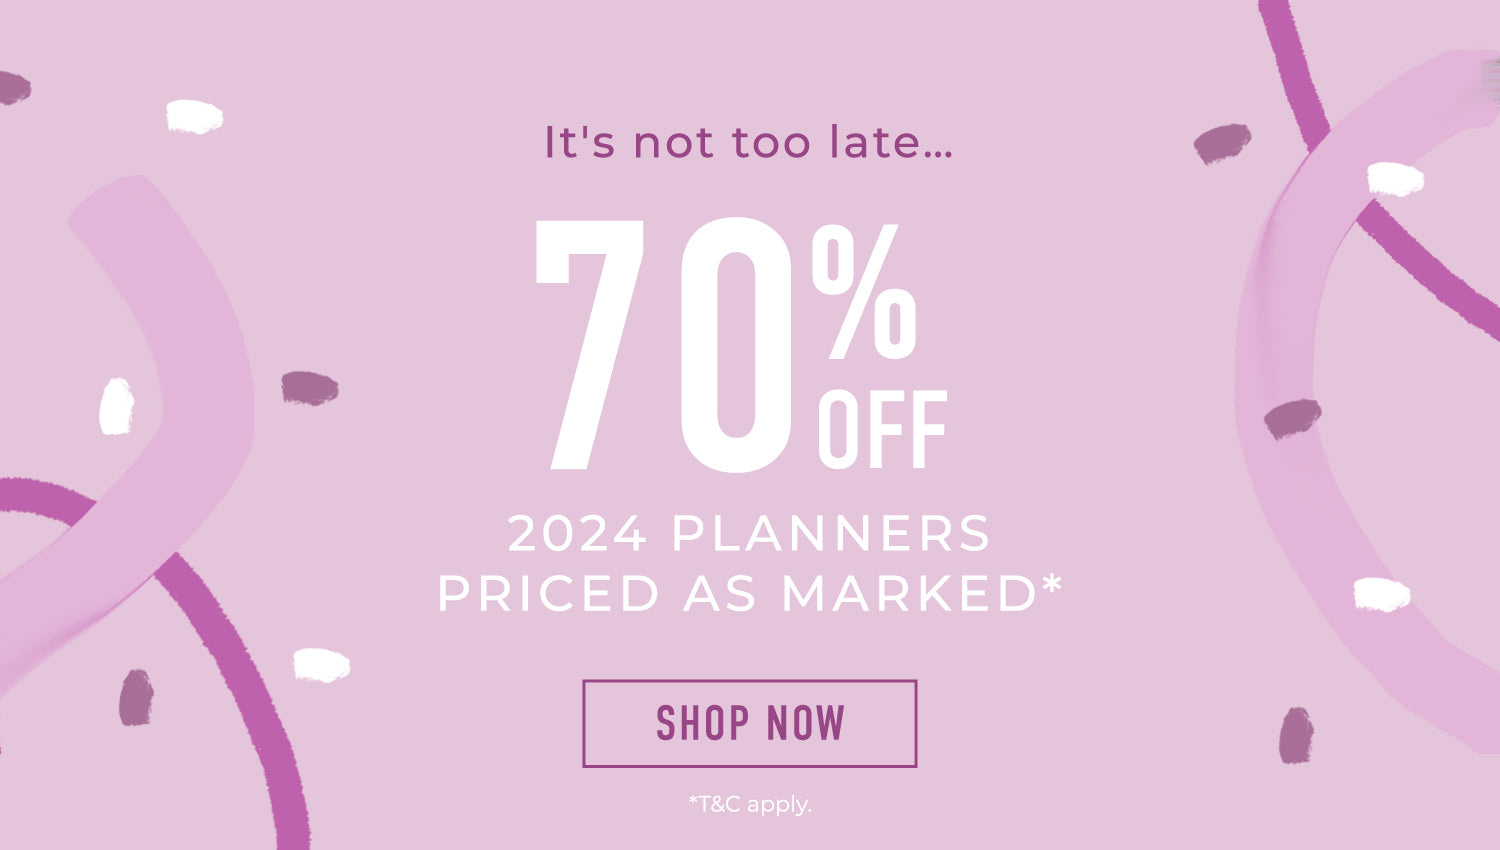 70& Off 2024 Planners - Prices as marked